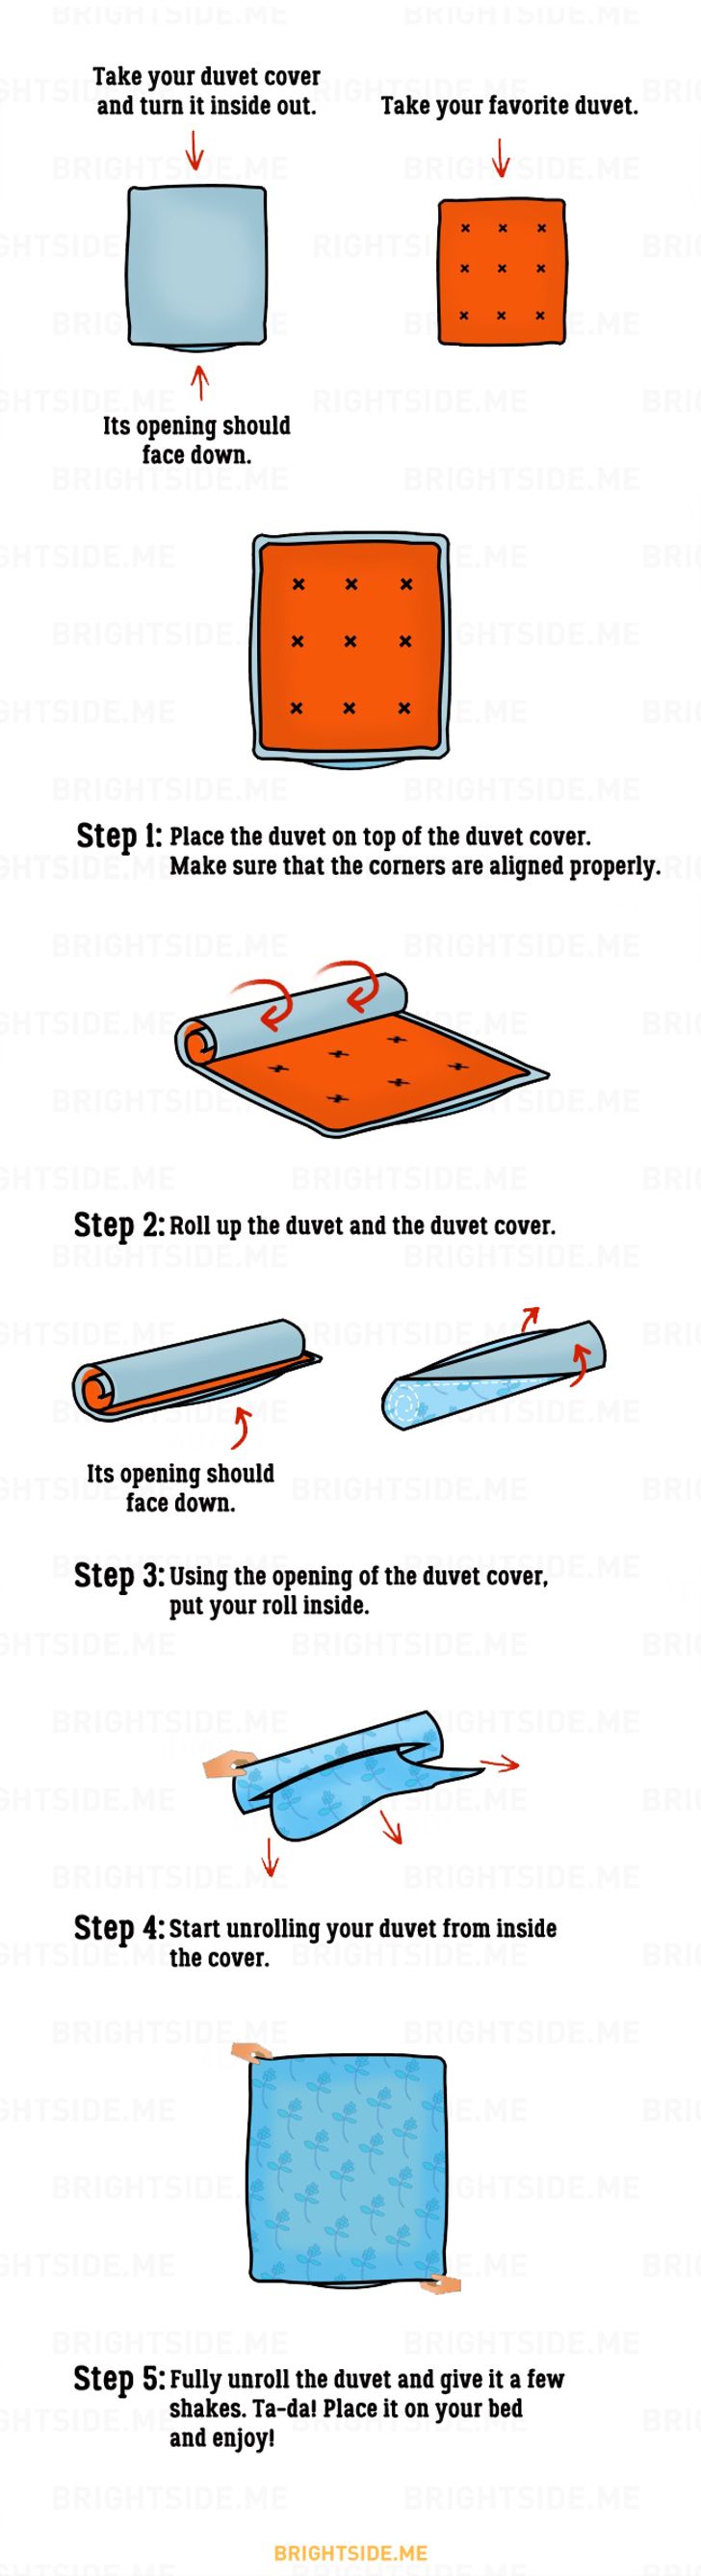 A Duvet Cover, Do You Have To Put Something Inside A Duvet Cover